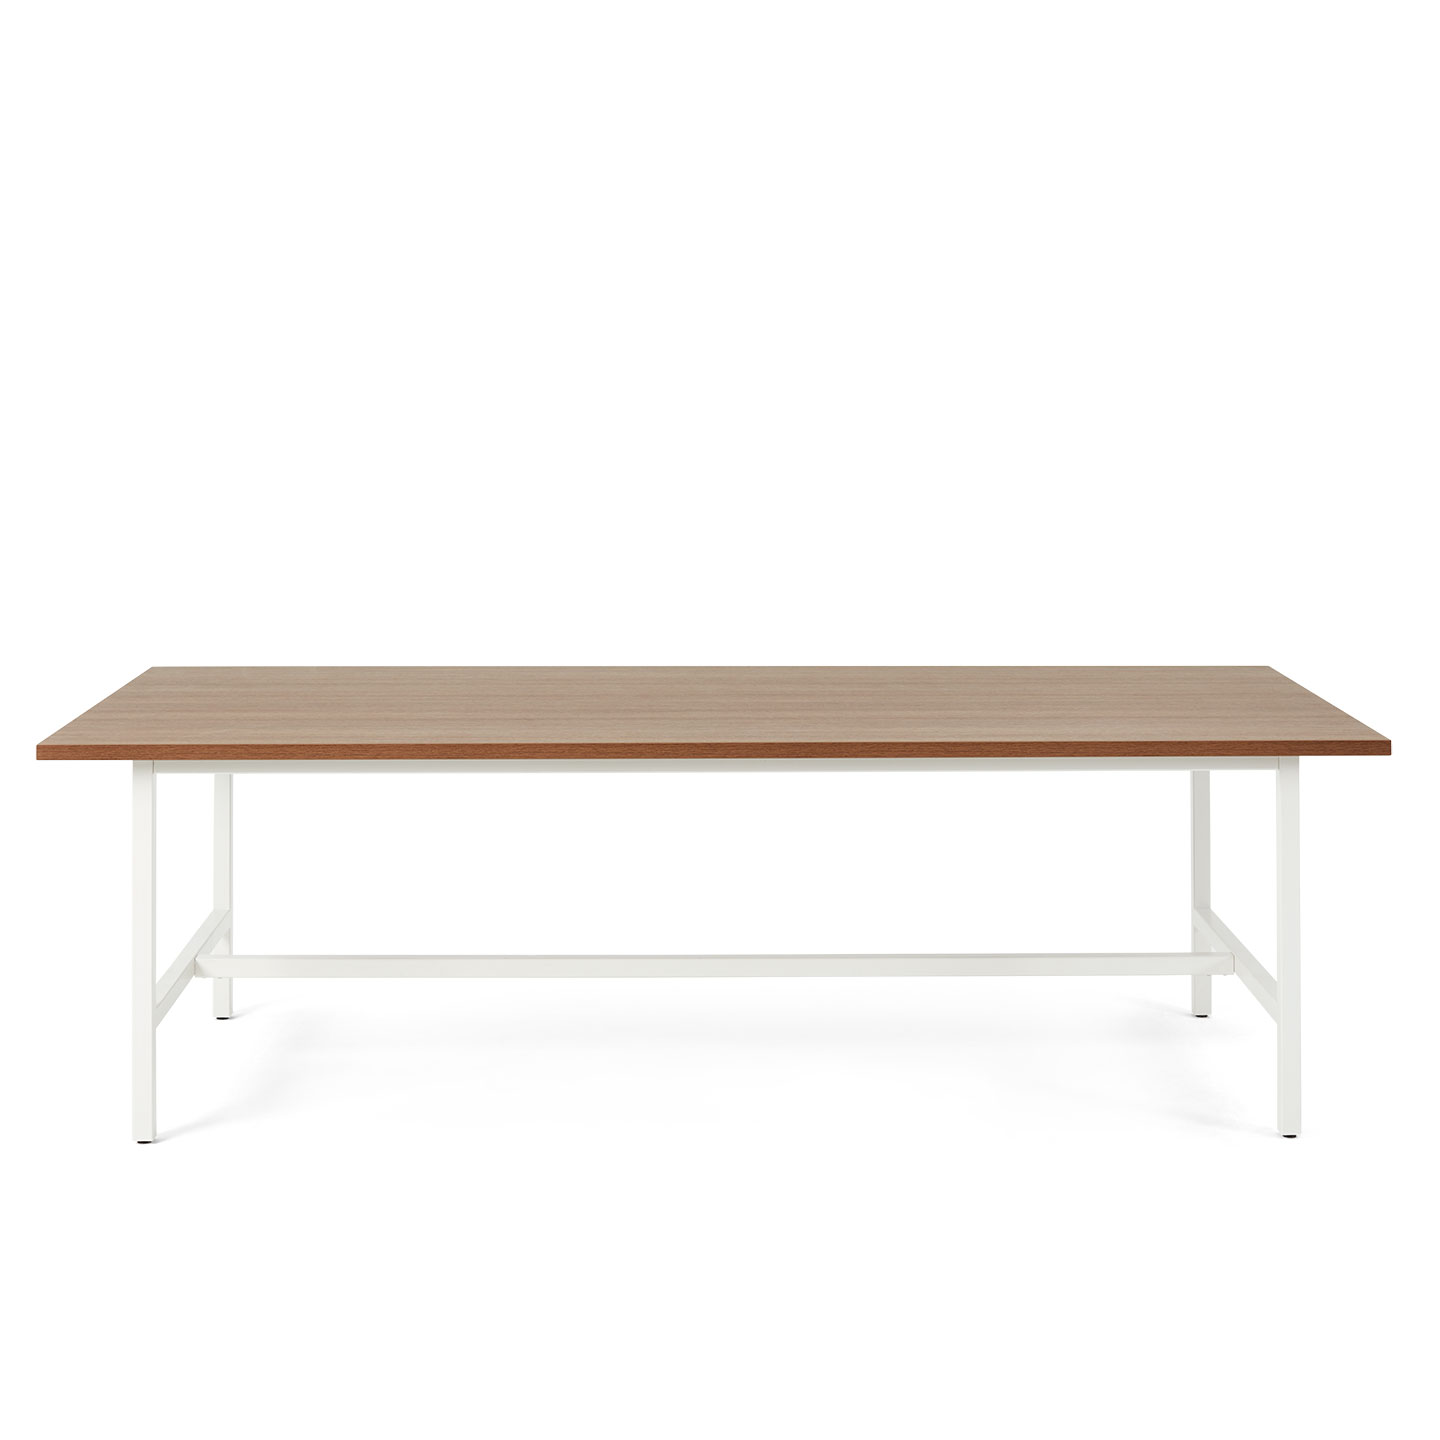 Haworth Cultivate table with 4 white legs and a rectangular veneer top